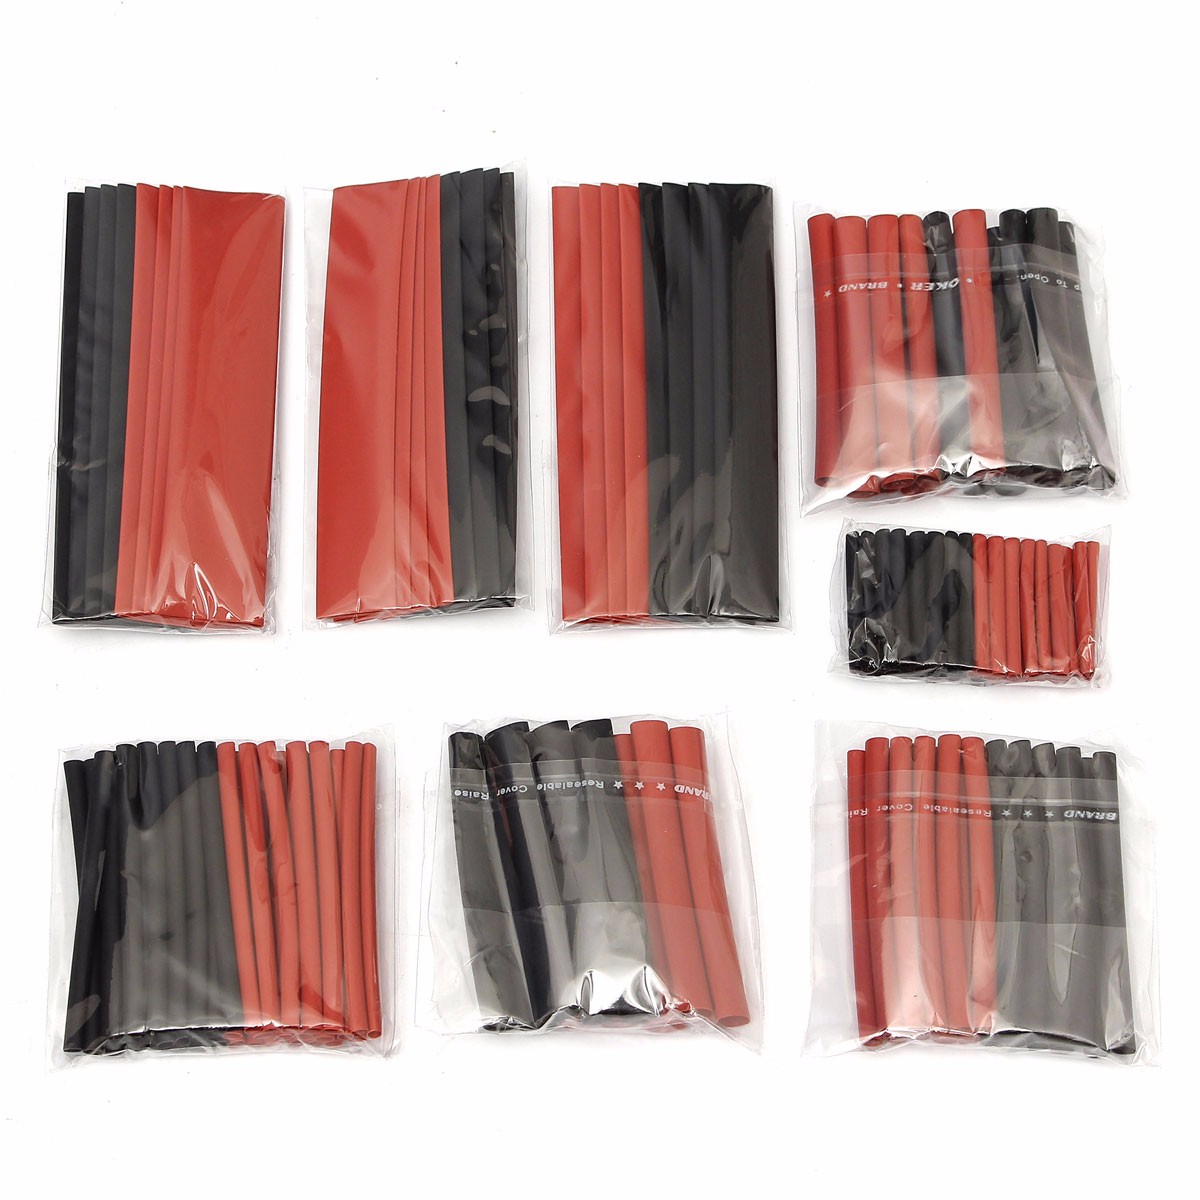 150-PCS-Halogen-Free-21-Heat-Shrink-Tubing-Wire-Cable-Sleeving-Wrap-Wire-Set-1057899-9